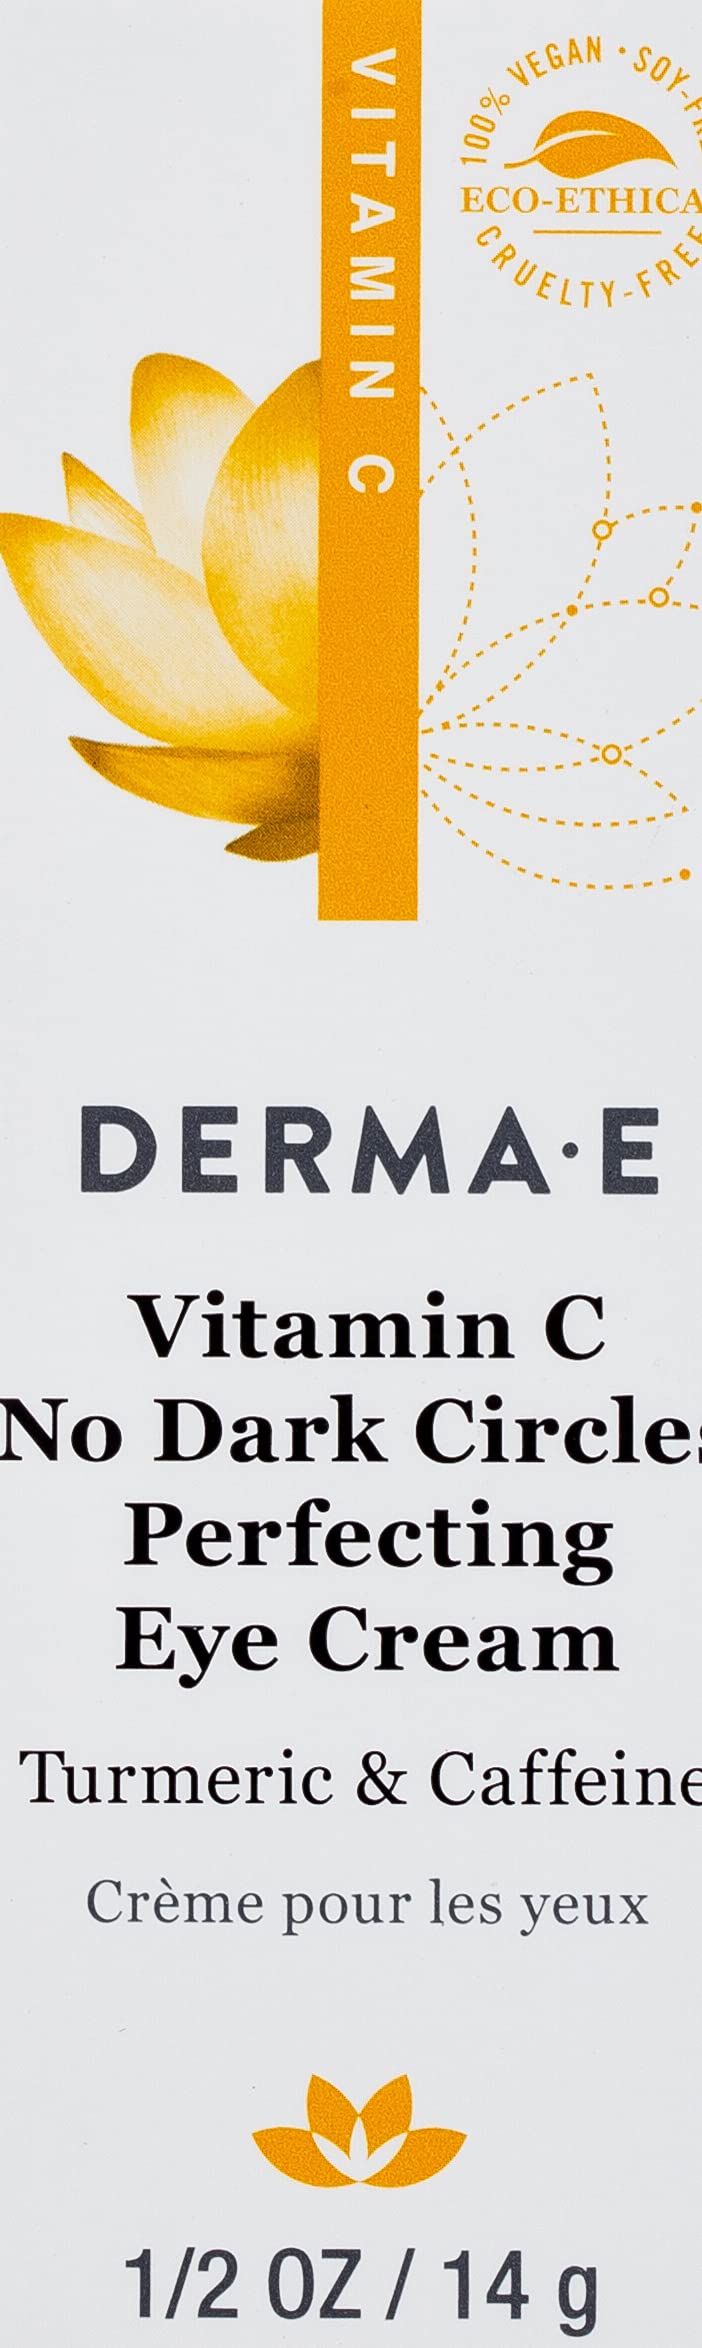 DERMA-E Vitamin C No Dark Circles Perfecting Eye Cream – Color Correcting Vitamin C Eye Cream with Turmeric and Caffeine for Fine Lines and Under Eye Puffiness, 0.5 Oz